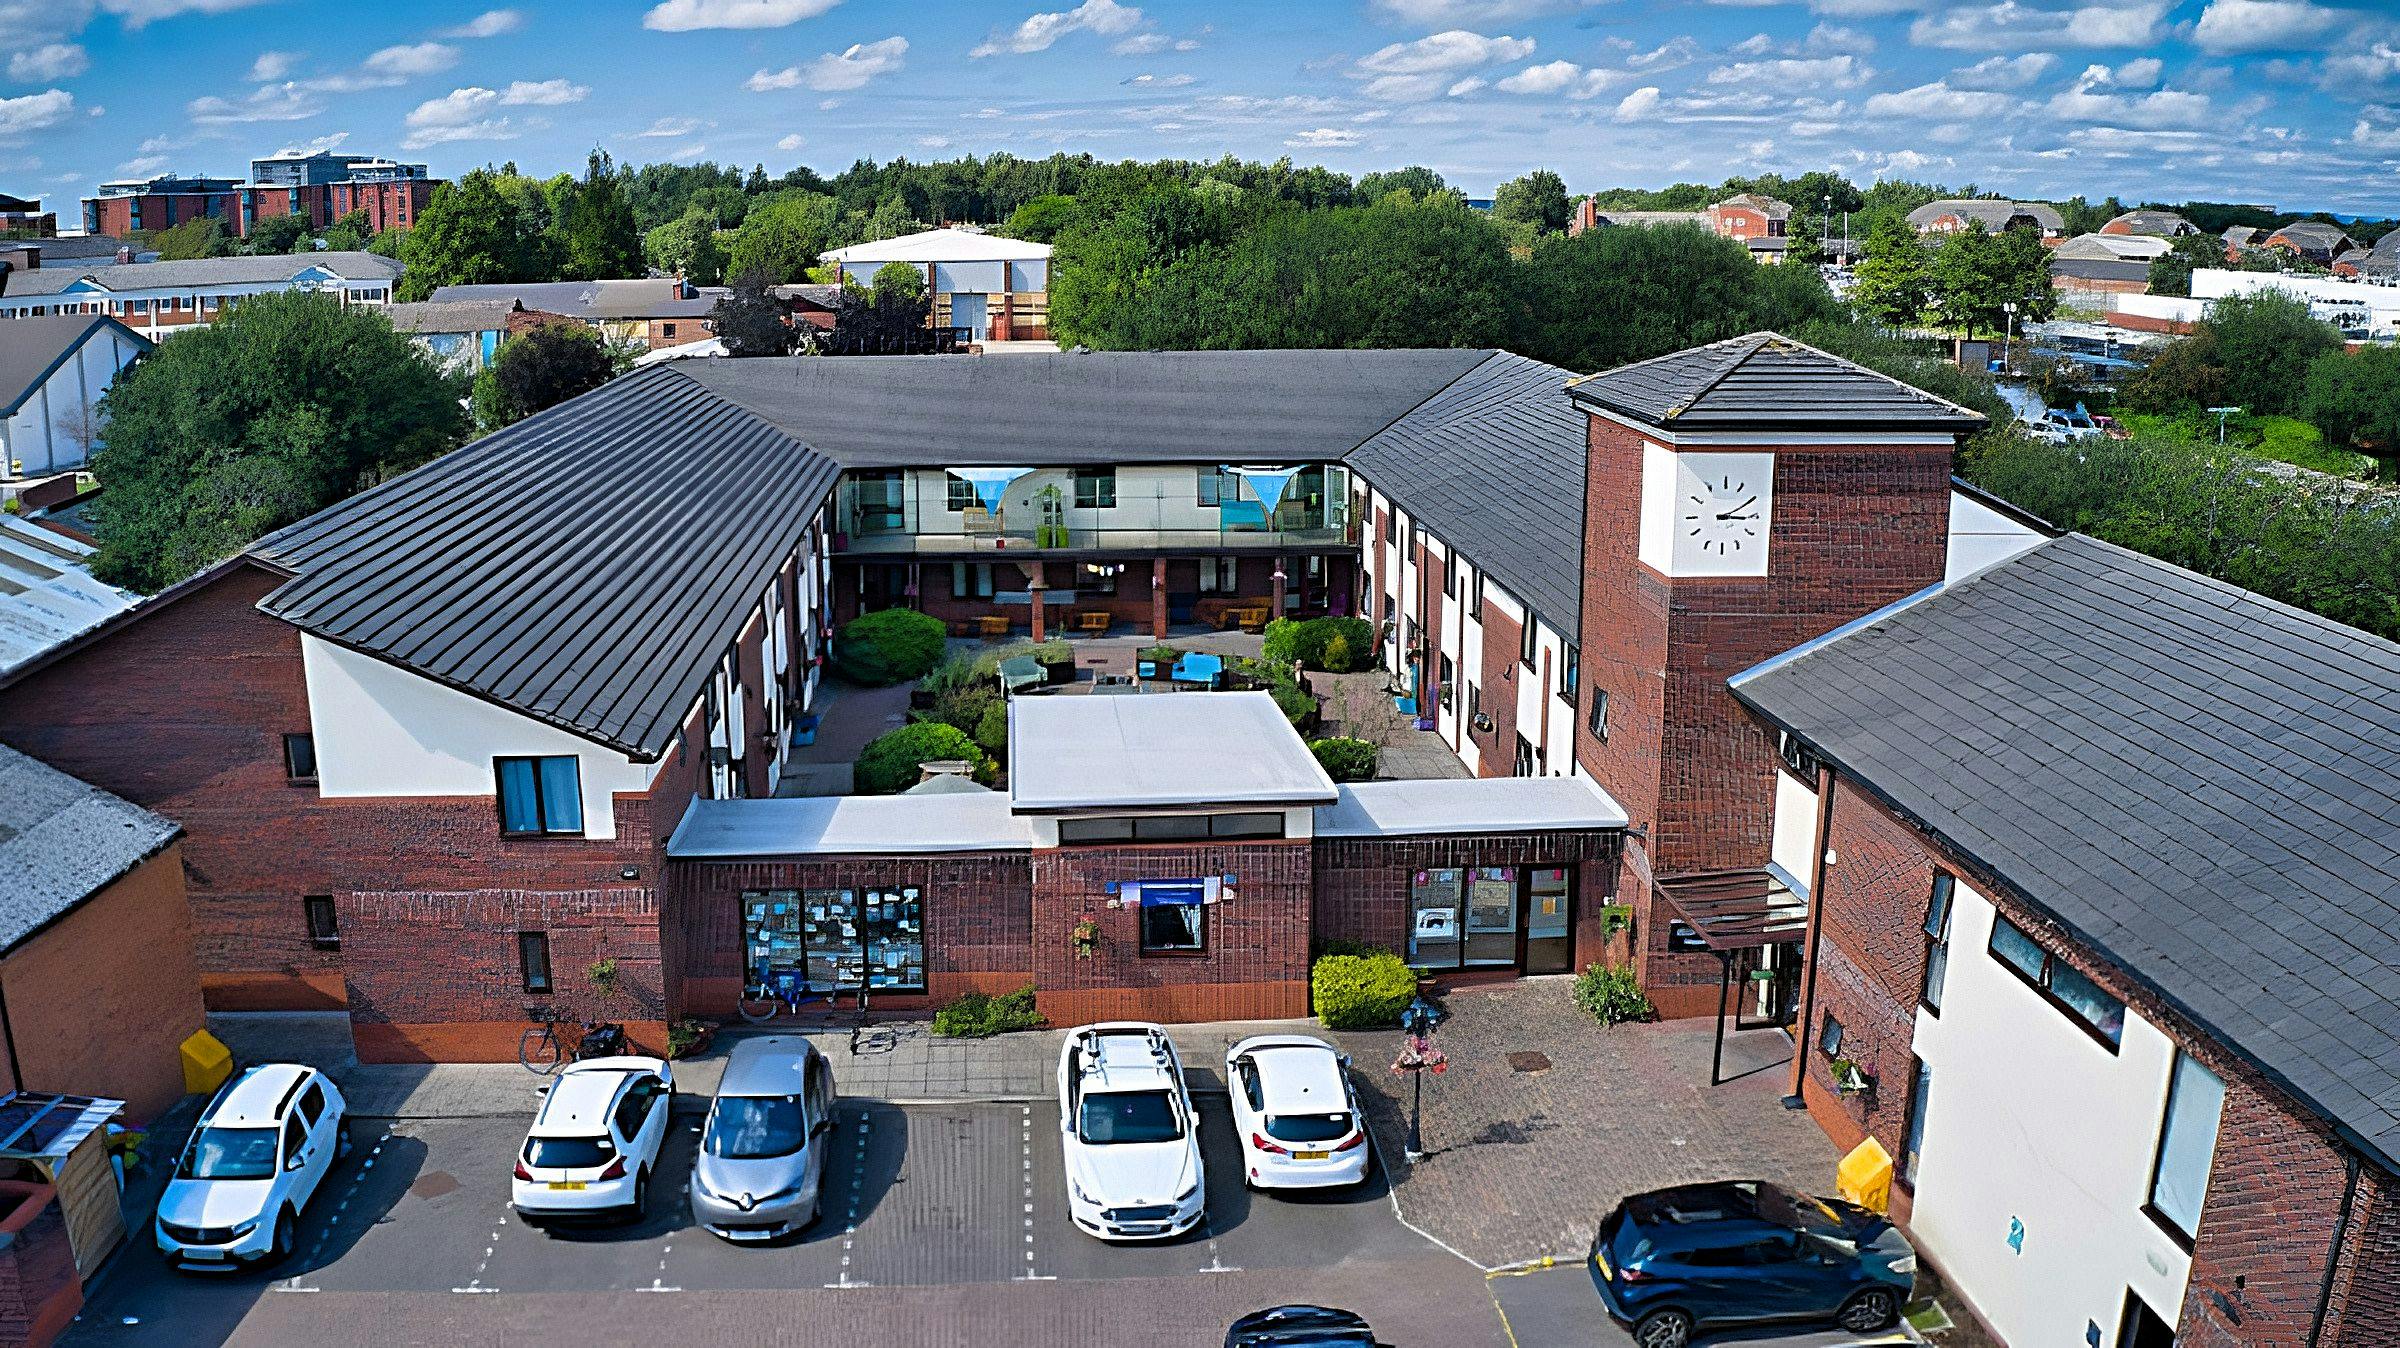 Harbour Healthcare - Cromwell Court care home 4